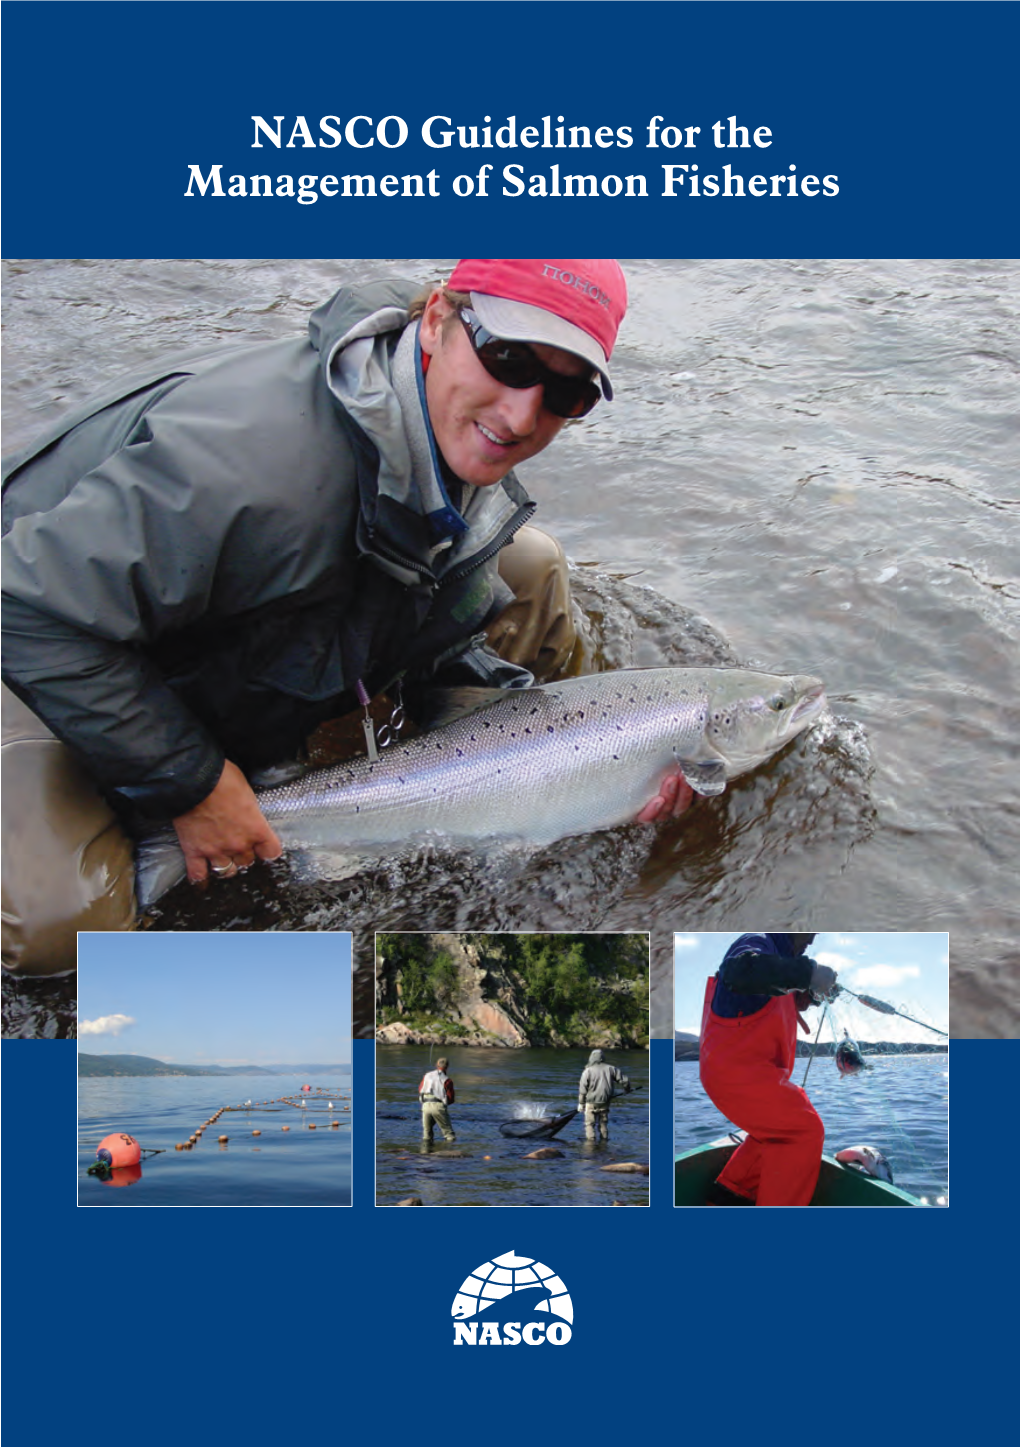 NASCO Guidelines for the Management of Salmon Fisheries NASCO Guidelines for the Management of Salmon Fisheries